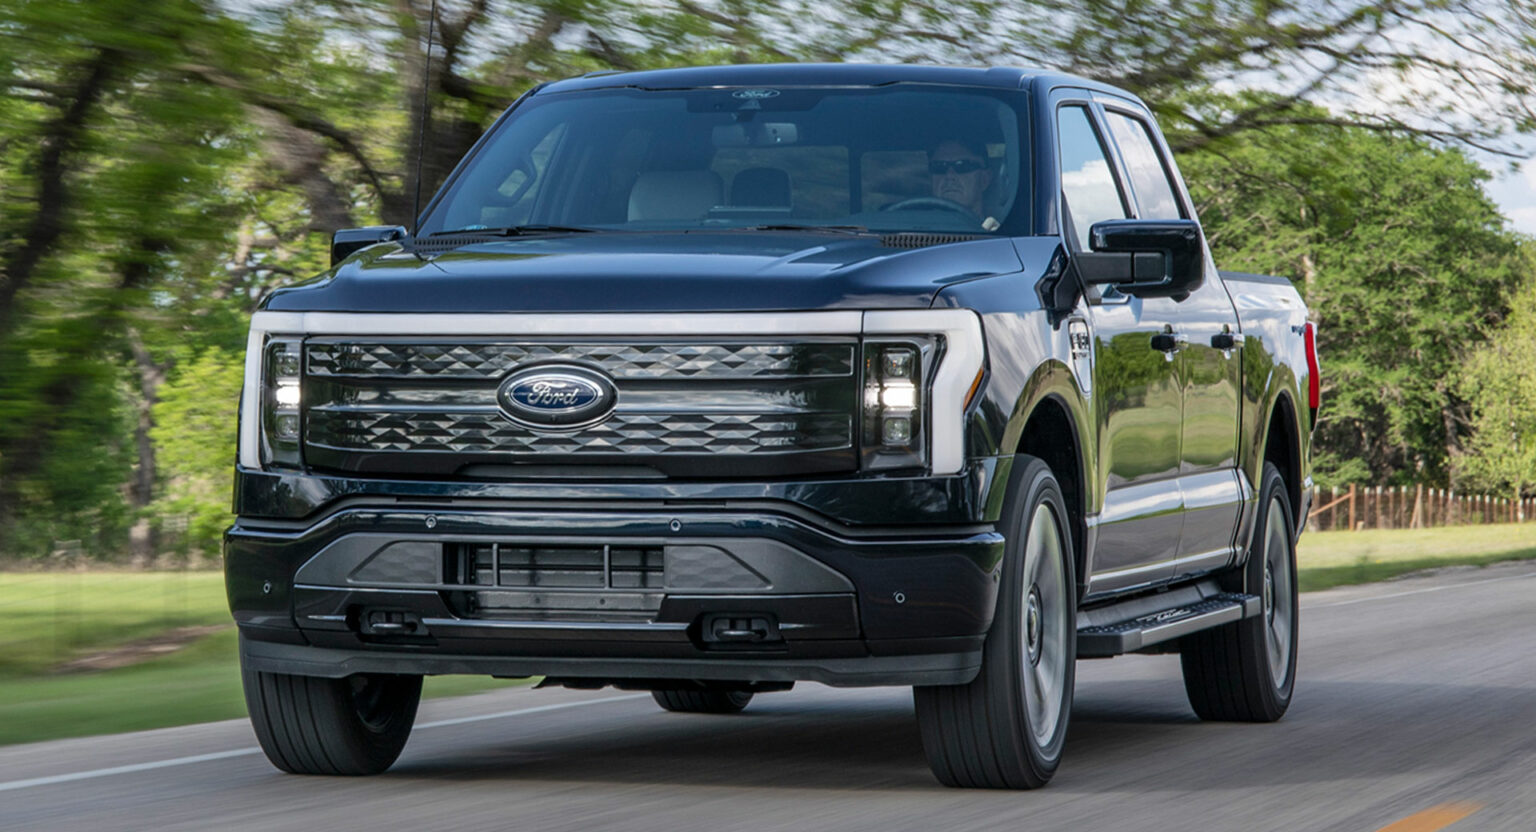 Ford F150 Lightning Faster Than Expected, Extended Range Hits 60 MPH